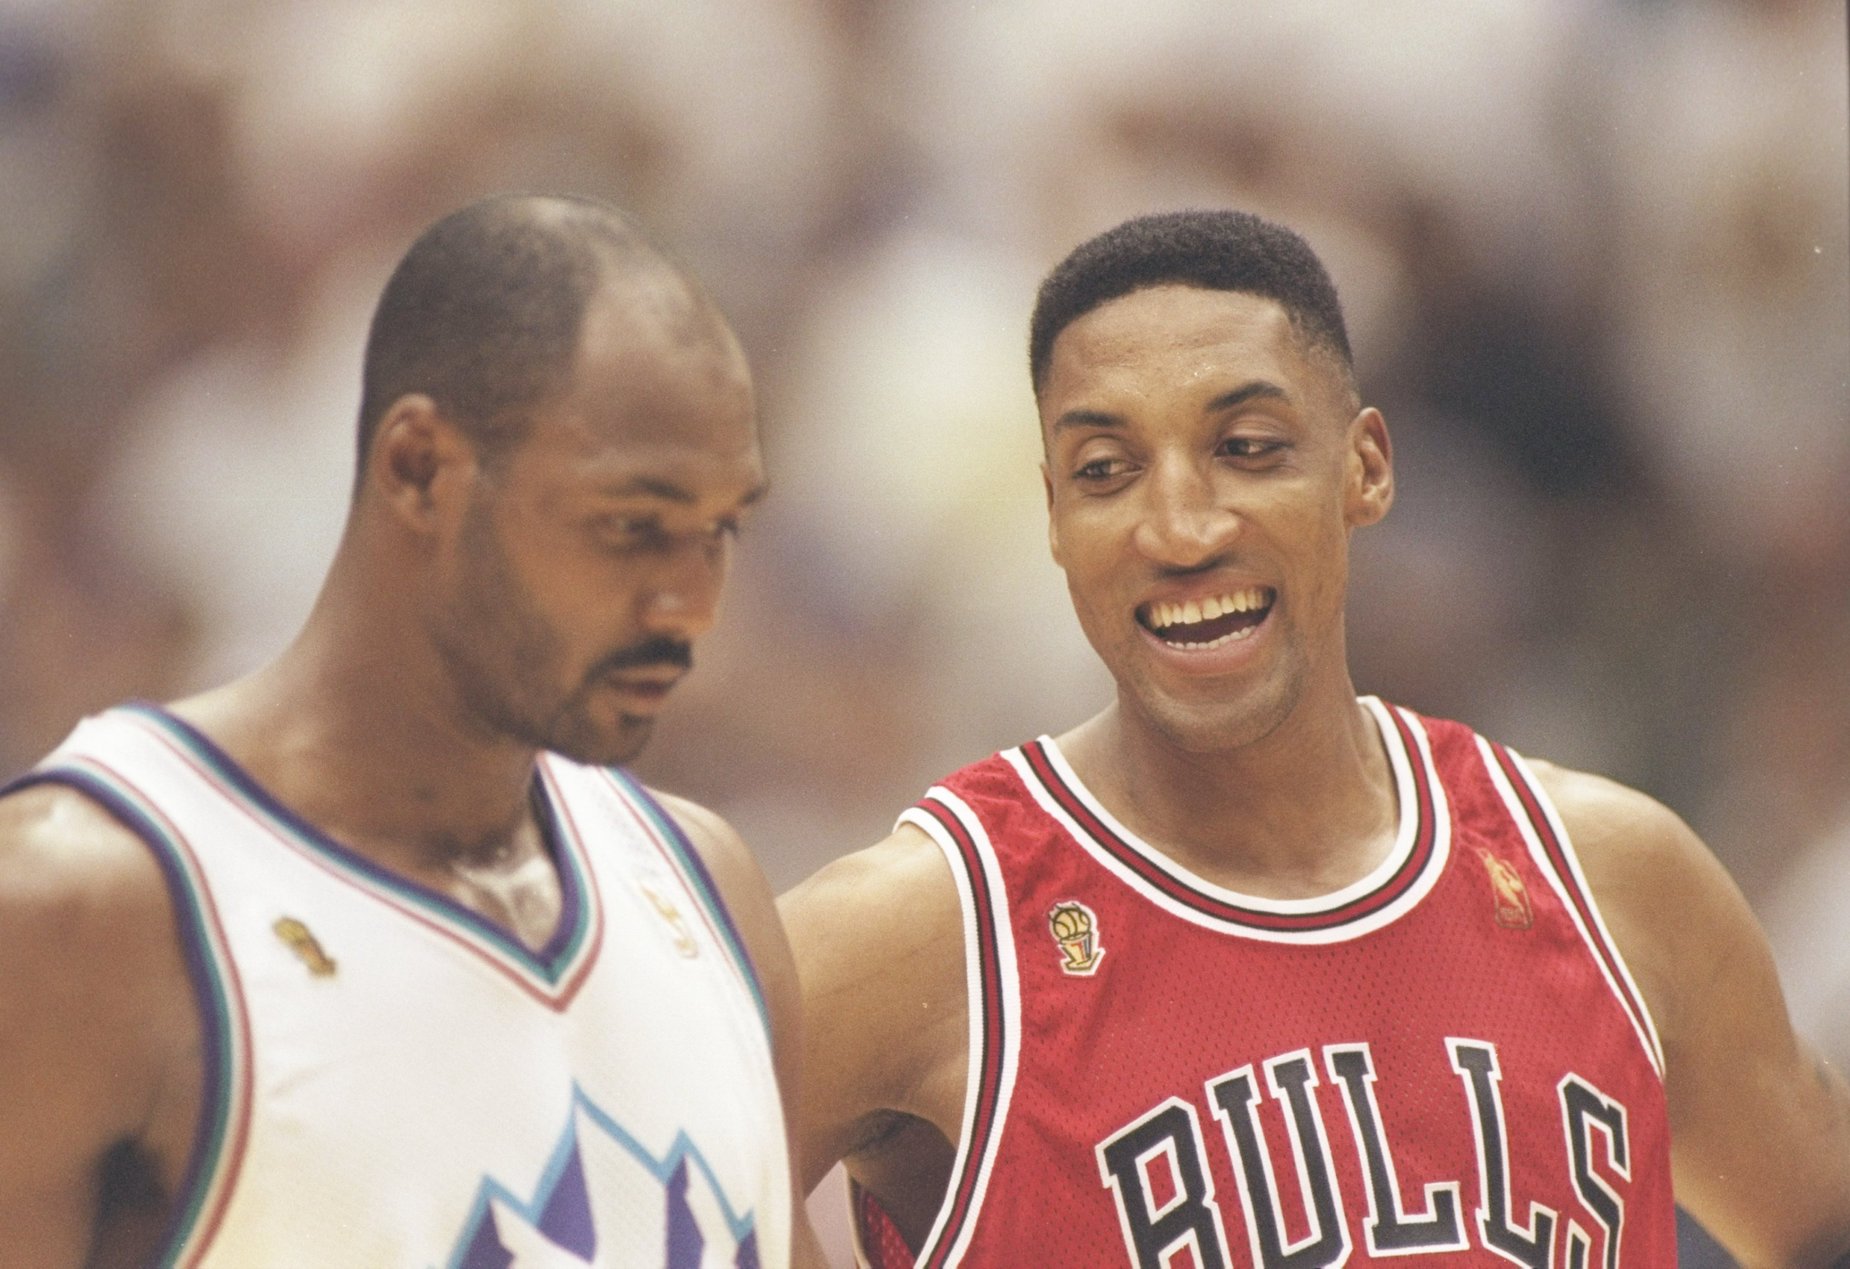 During his time with the Utah Jazz, Karl Malone had some memorable duels with Scottie Pippen and Michael Jordan.